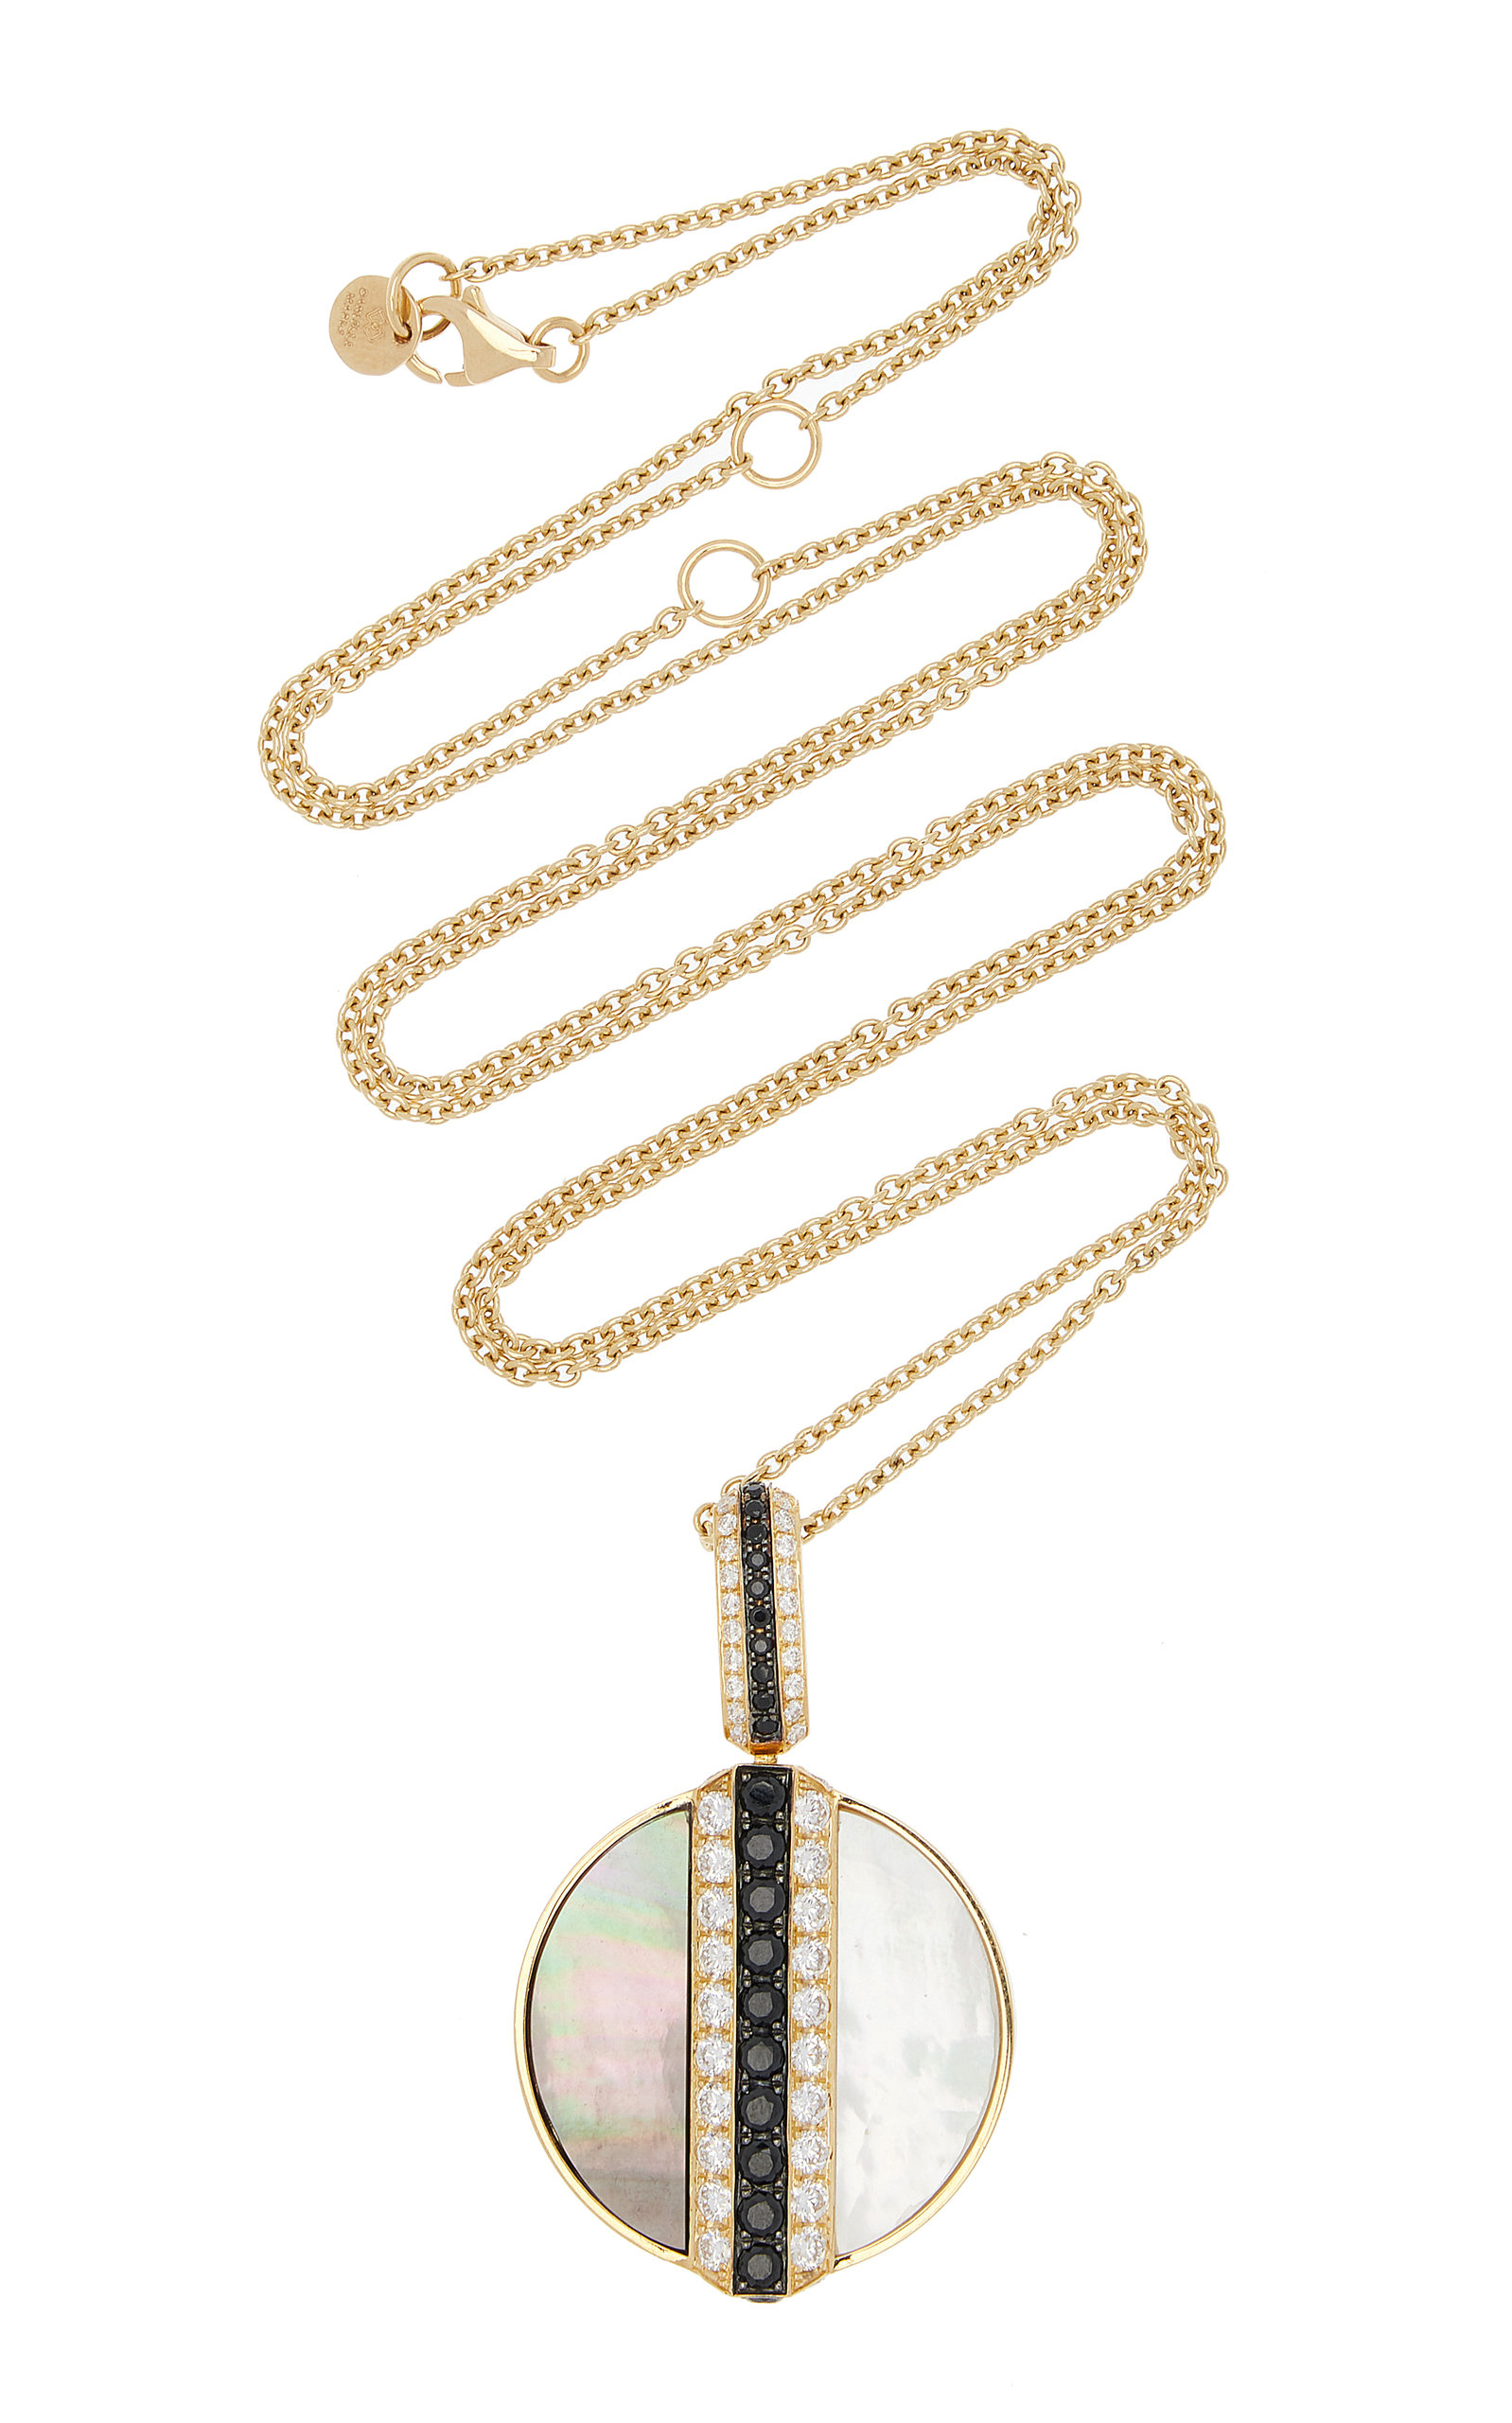 Danielle Marks Women's Luna 18k Yellow Gold Mother-of-Pearl; Diamond Necklace